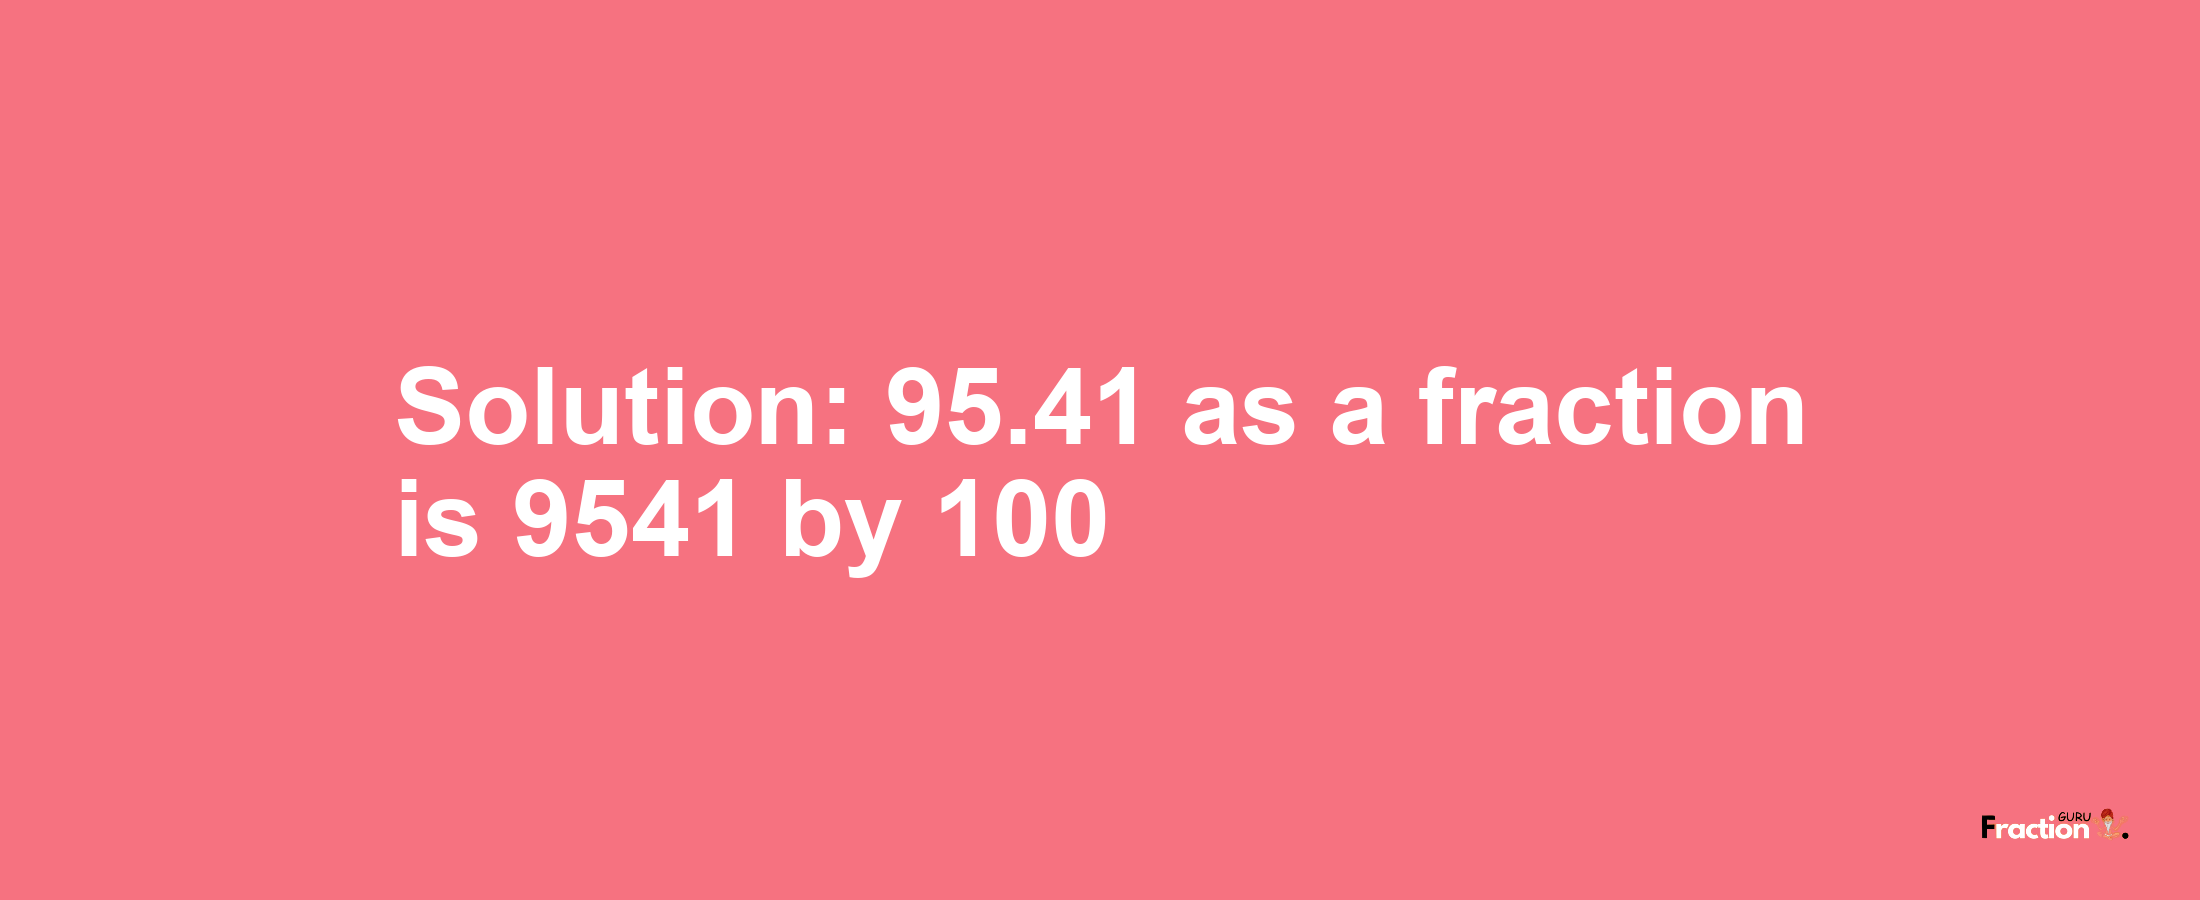 Solution:95.41 as a fraction is 9541/100